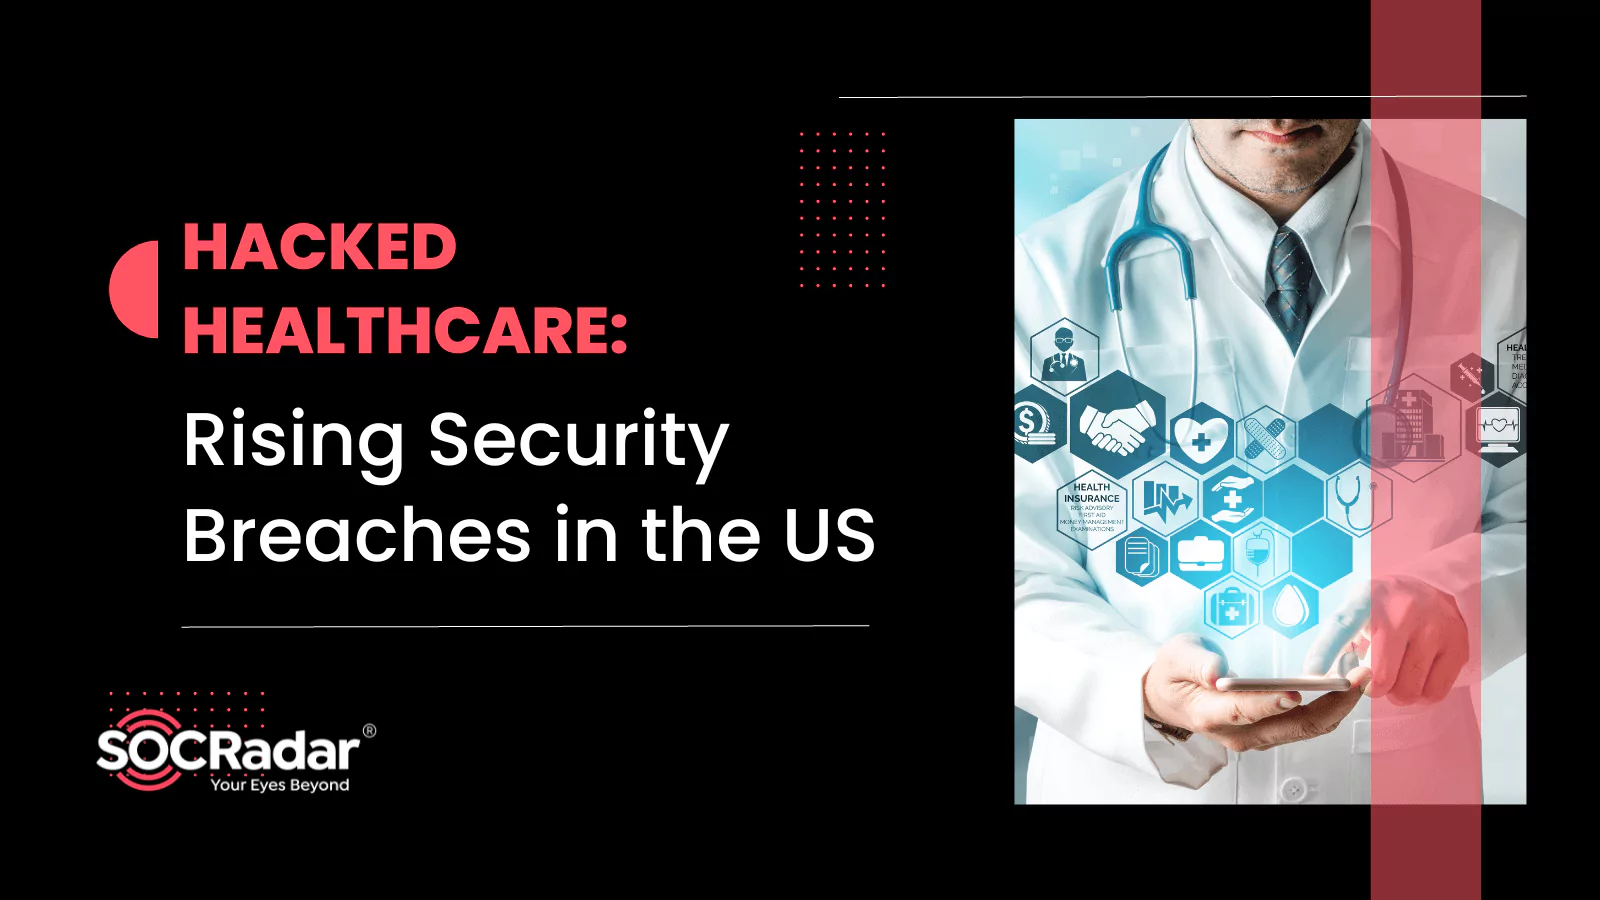 SOCRadar® Cyber Intelligence Inc. | Hacked Healthcare: Rising Security Breaches in the US